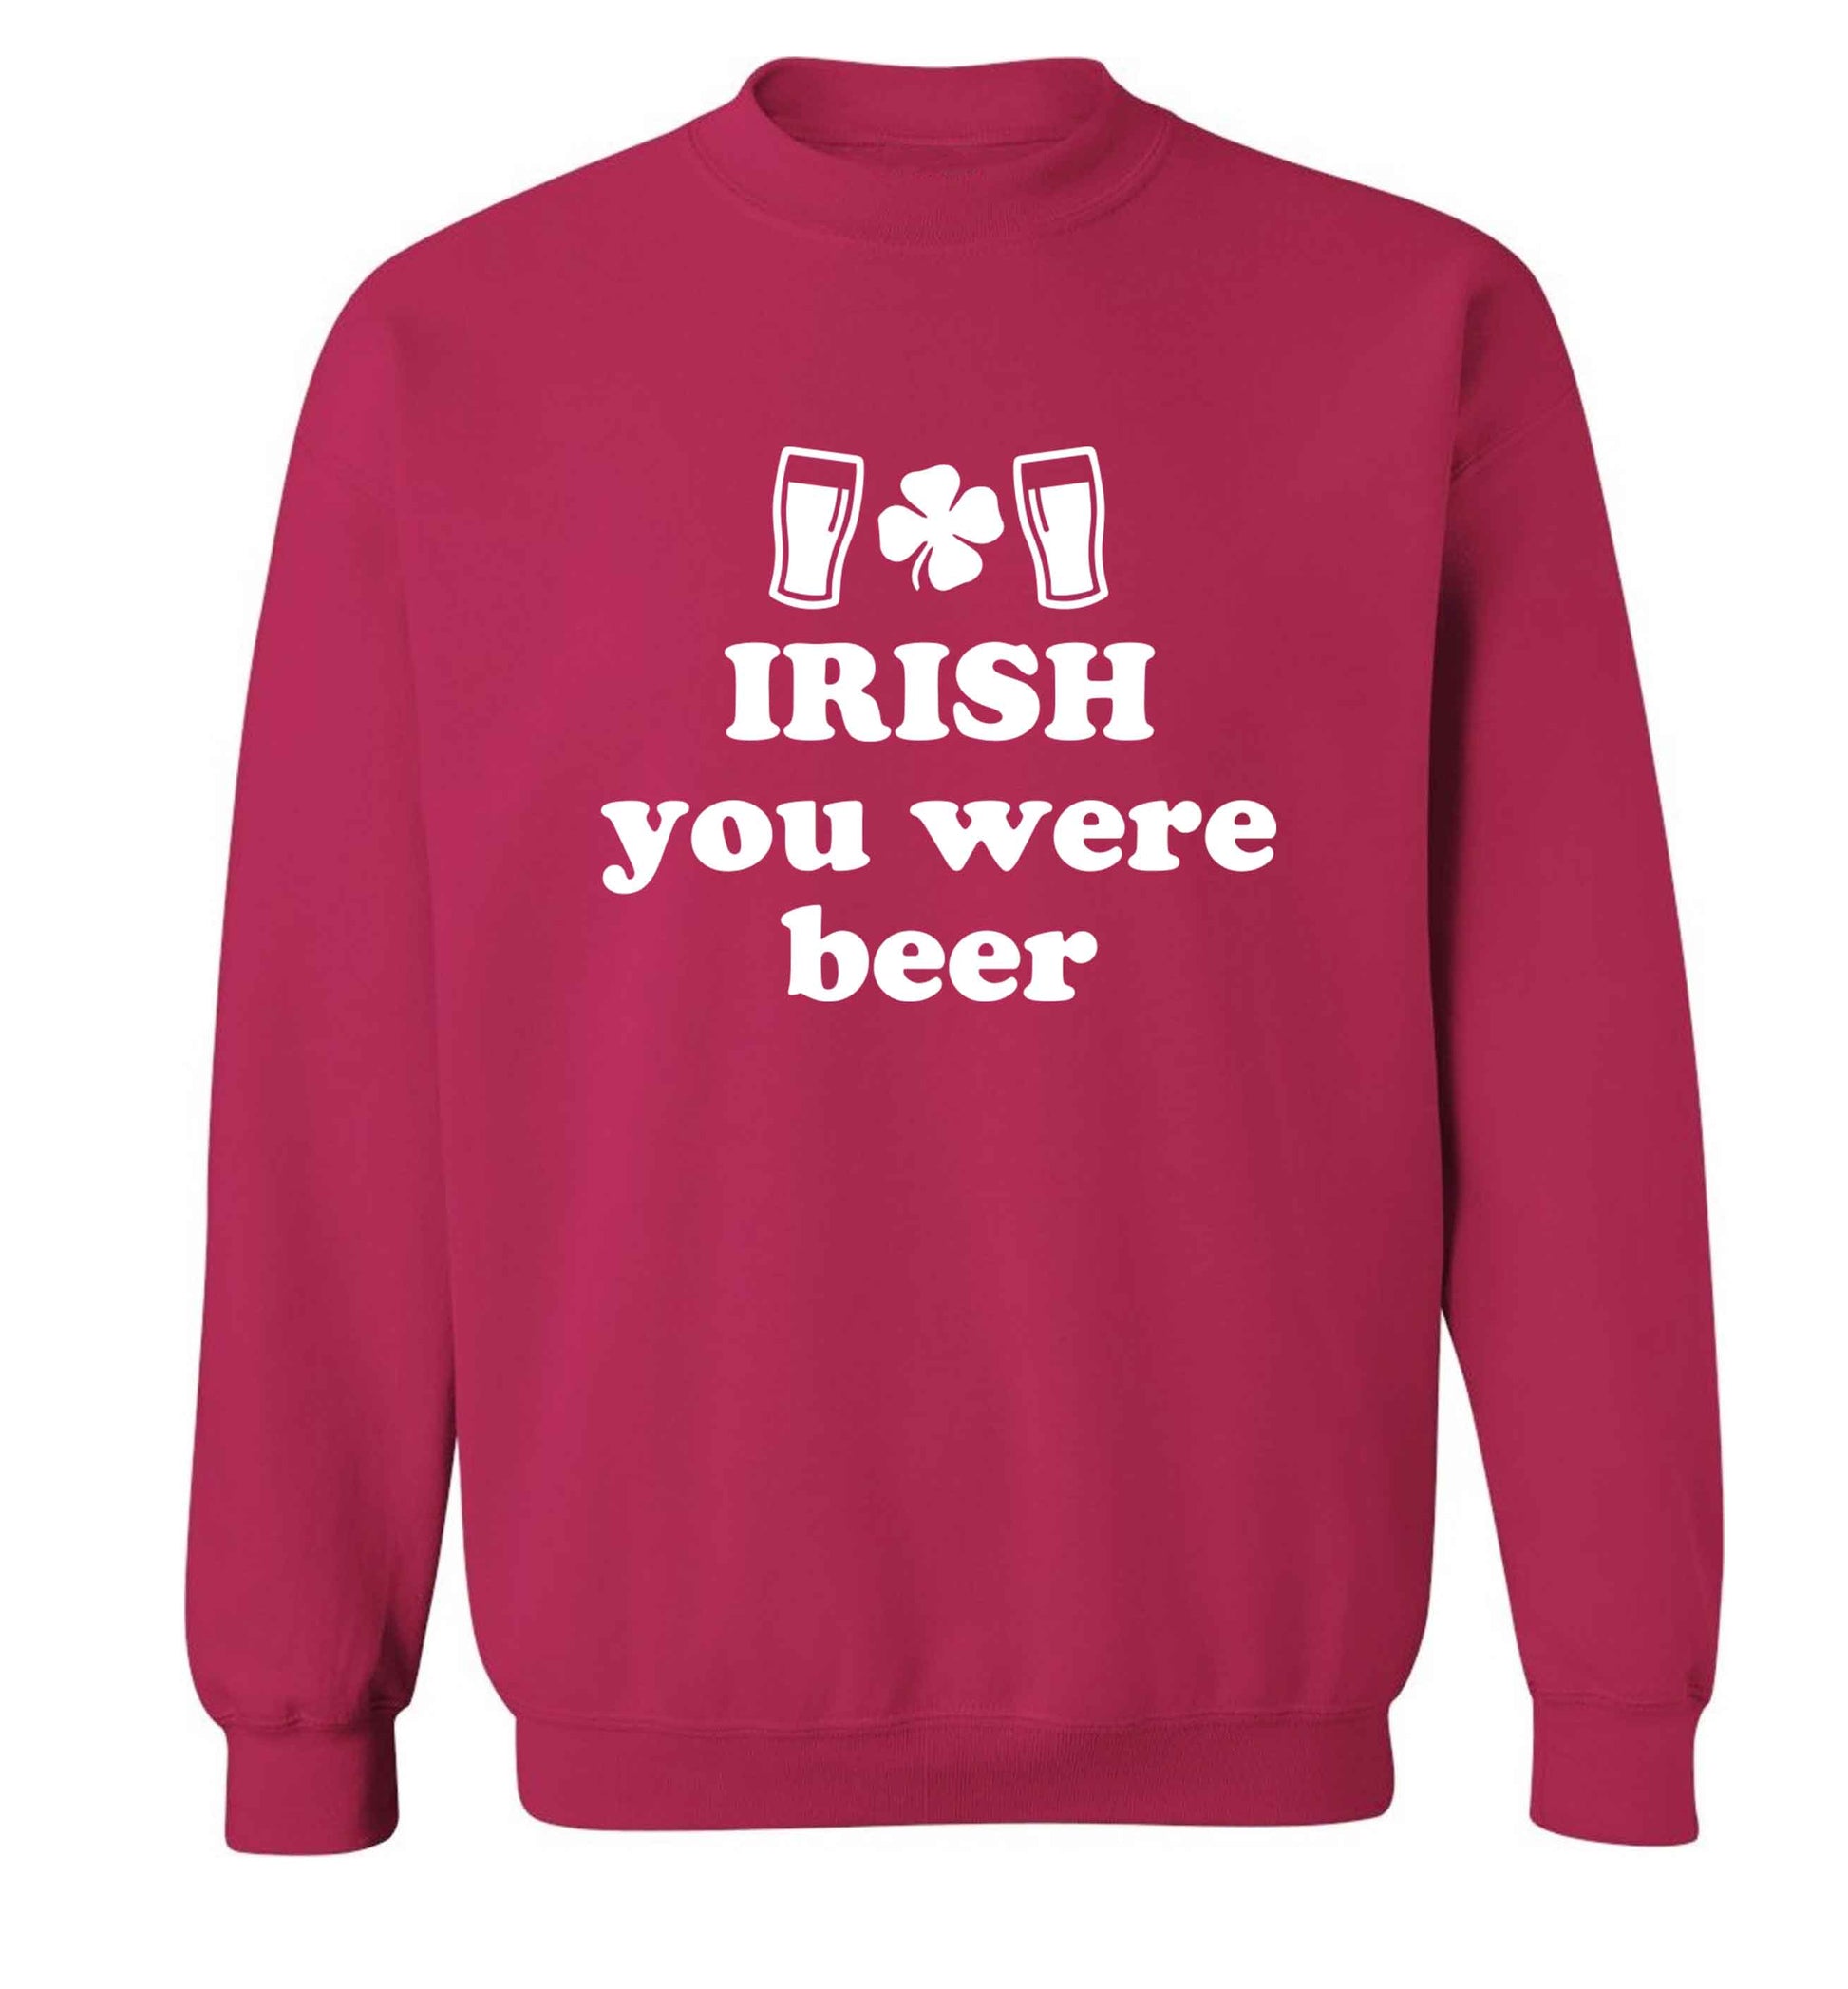 Irish you were beer adult's unisex pink sweater 2XL